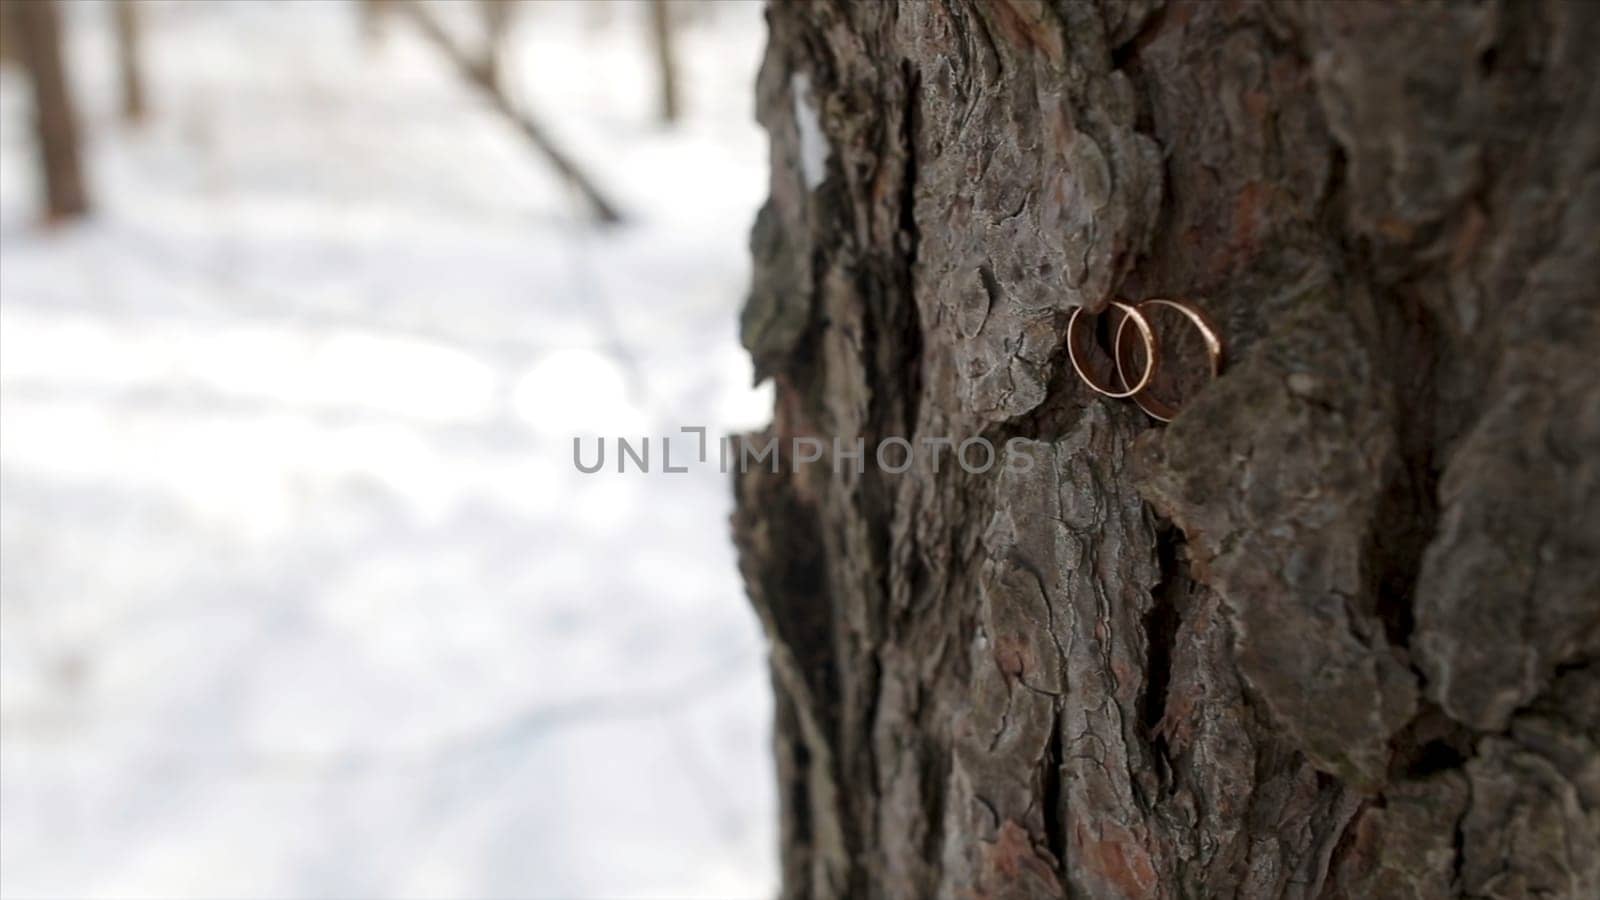 Wedding rings placed on a tree bark. Couple wedding rings on old wood texture, the bark of the tree. Wedding rings on a tree bark. Jewelry at the wedding